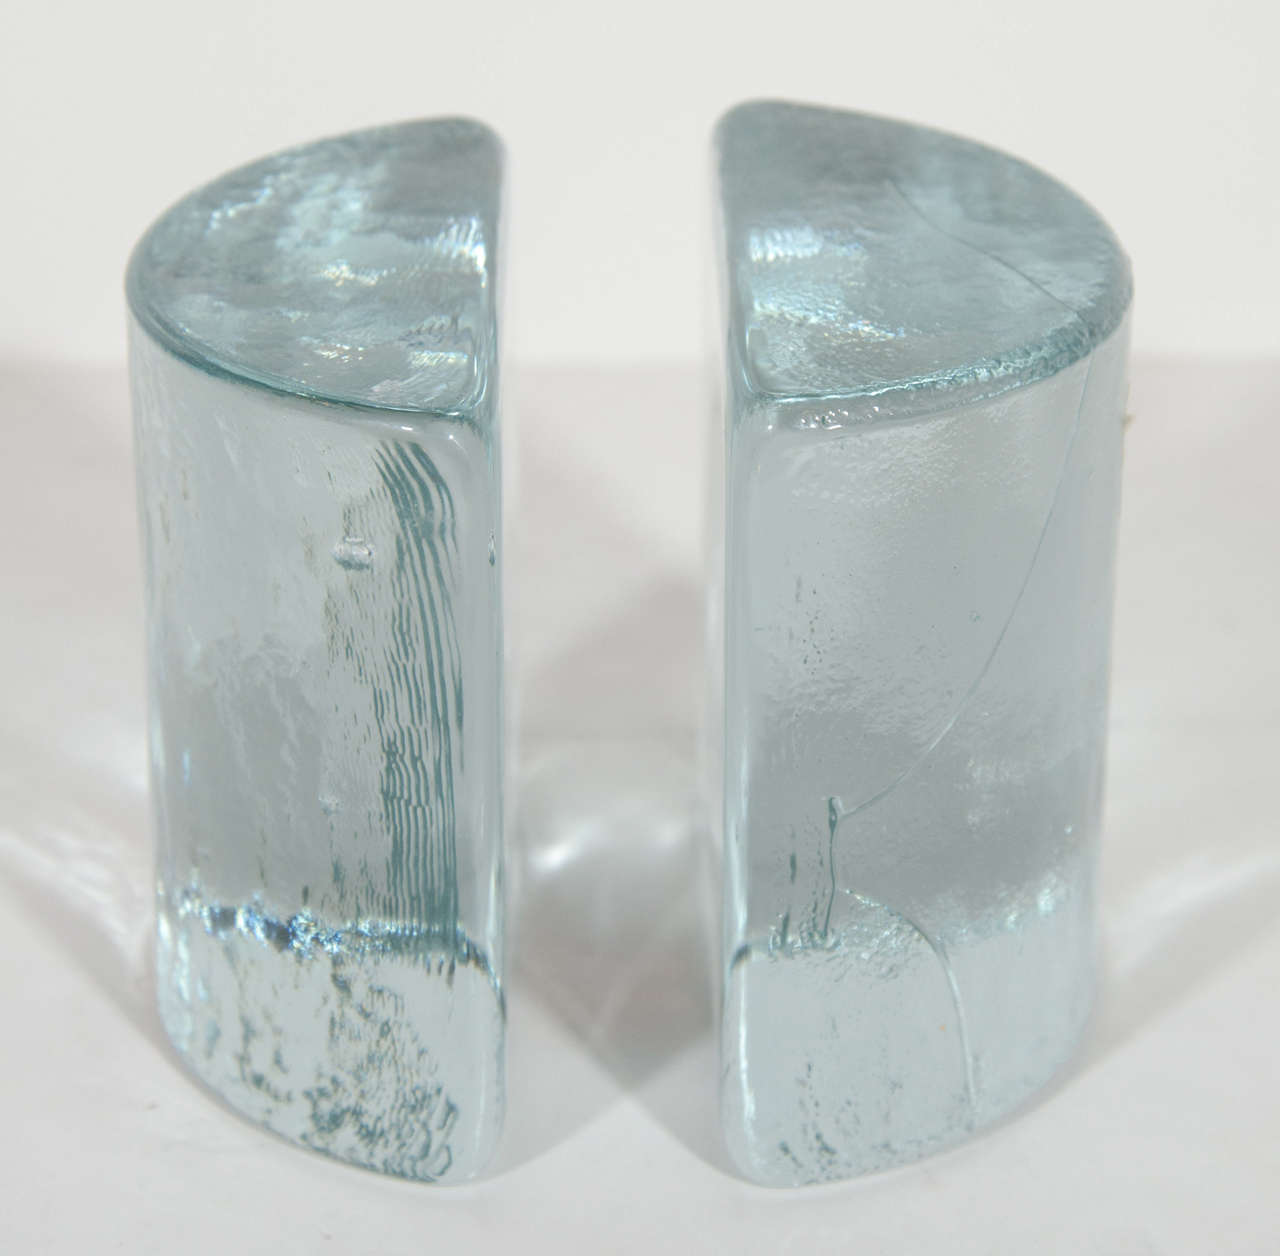 Pair of vintage modern individually hand blown glass bookends. The bookends are comprised of two half circles or demilune glass blocks with ice glass design. Can be used as decorative objects or desk accessory .  Signed Blenko.